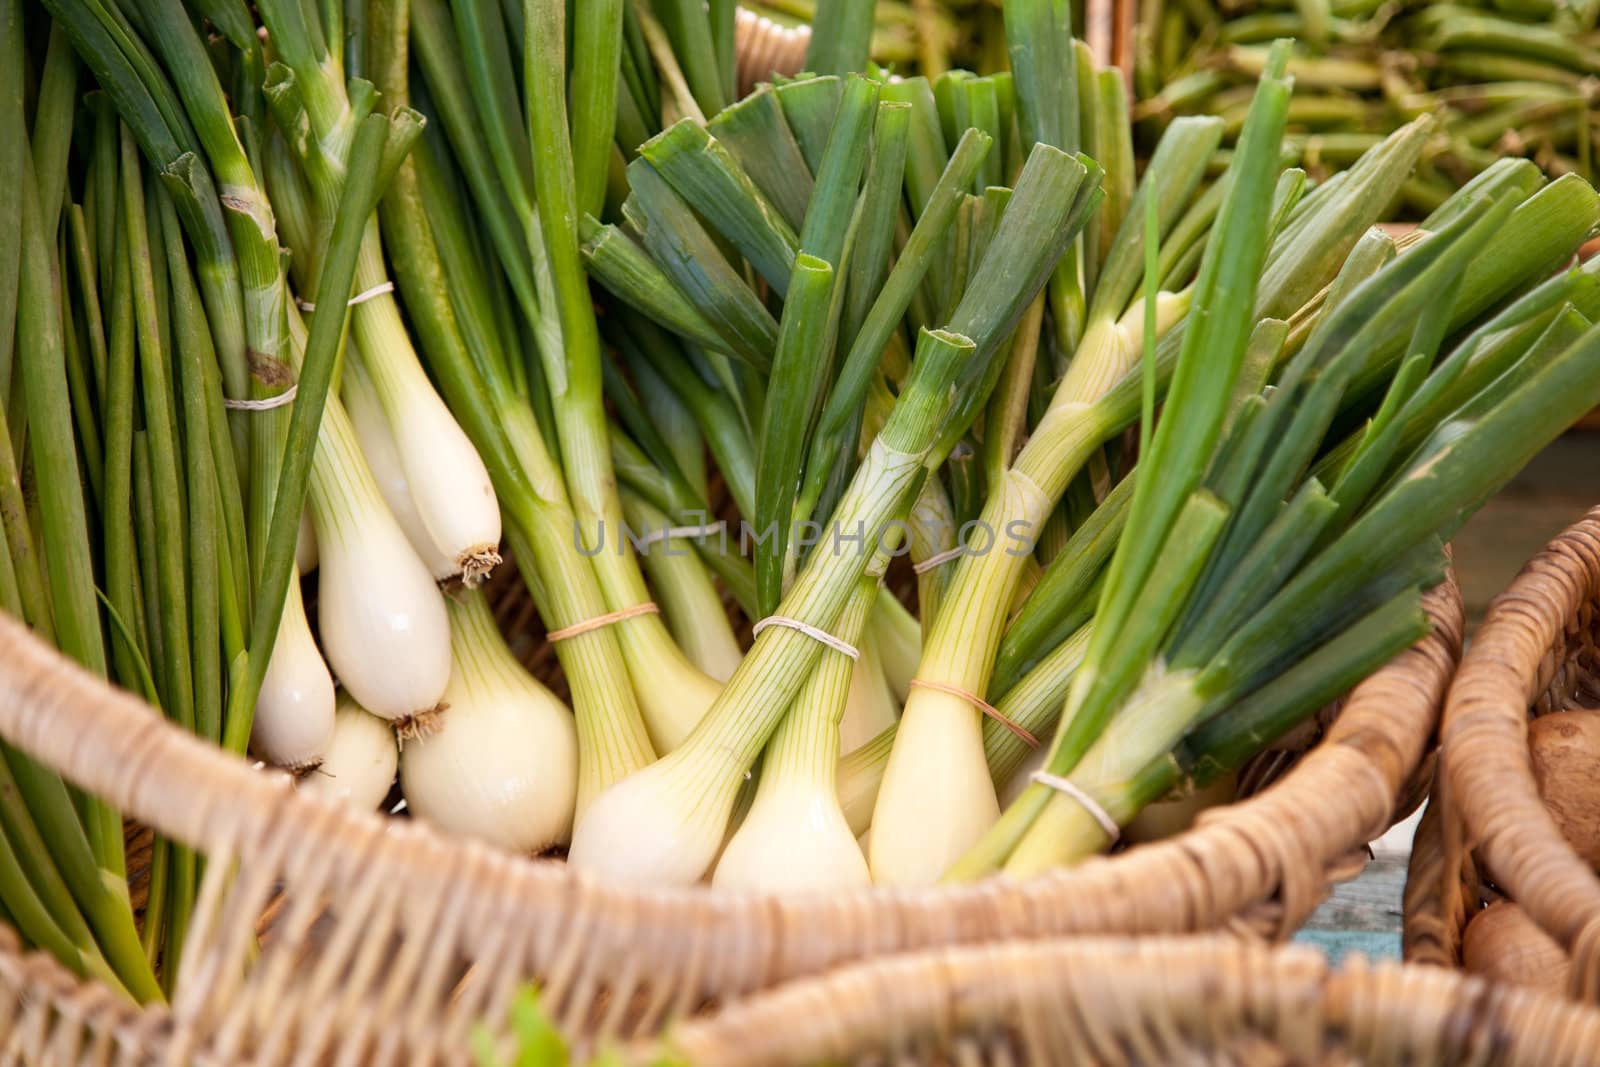 A bunch of fresh spring onions at a market